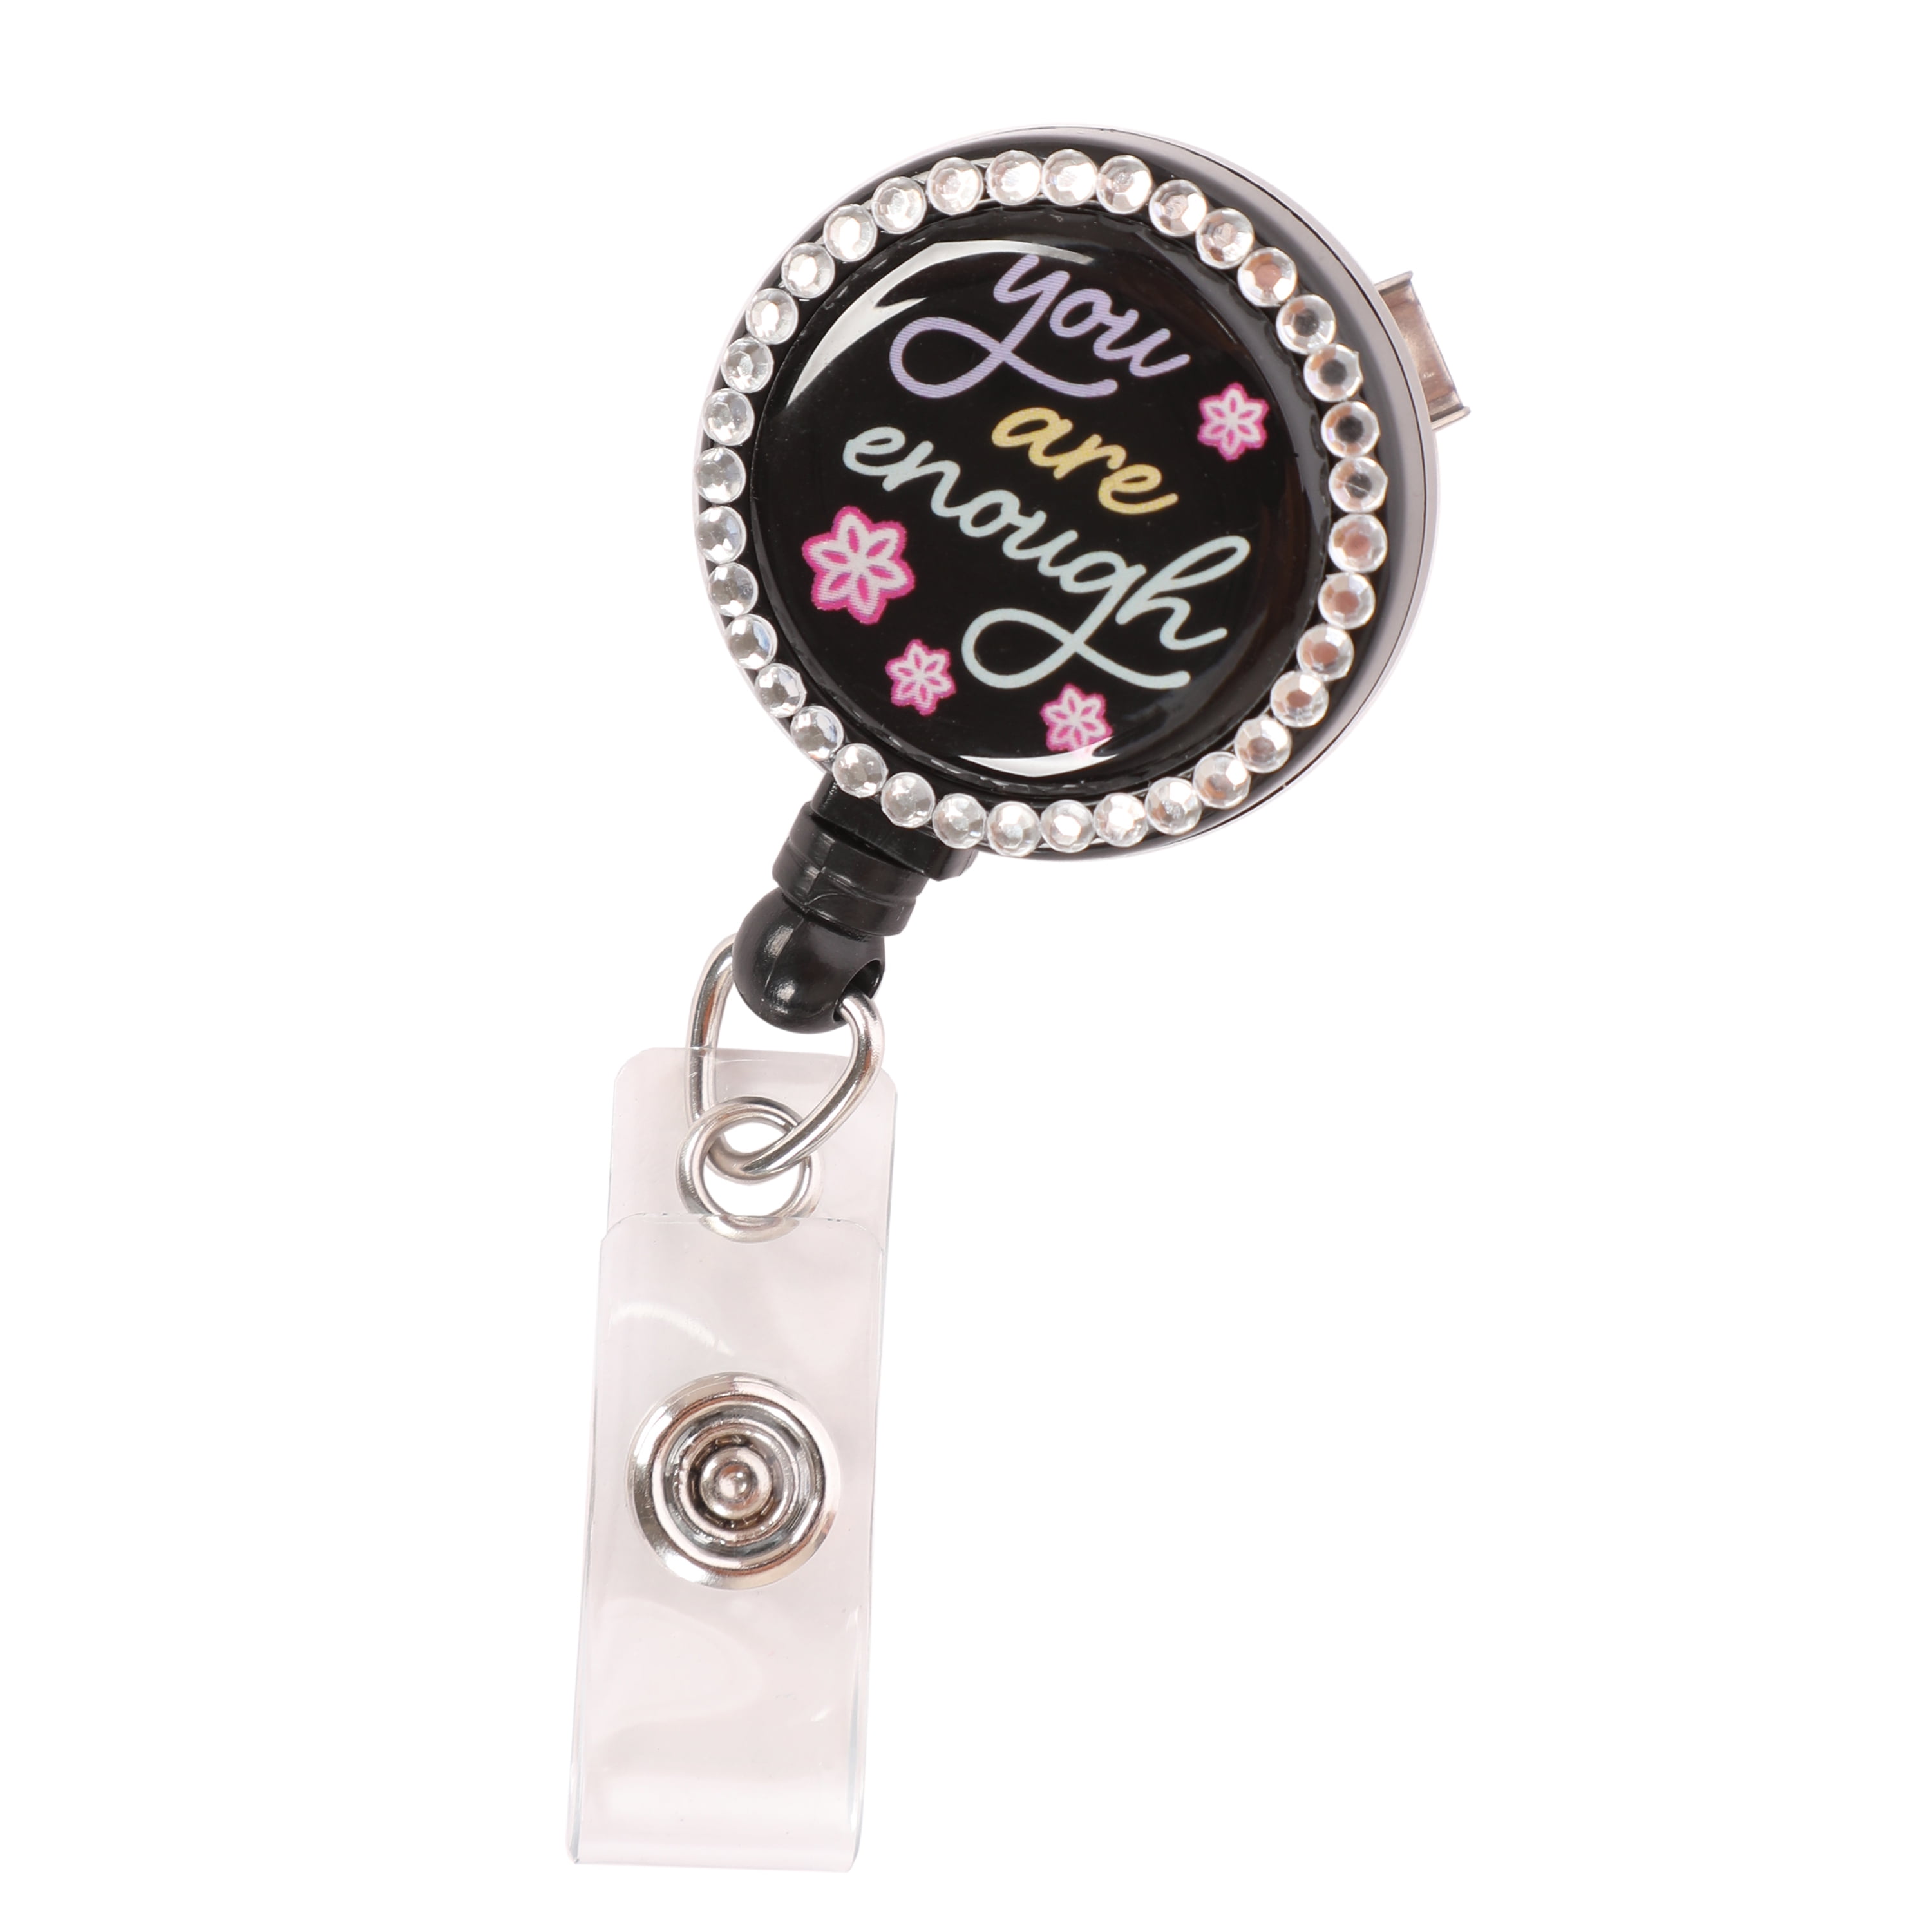 PR Essentials Brand Women's Adult You Are Enough ID Badge Reel, Black